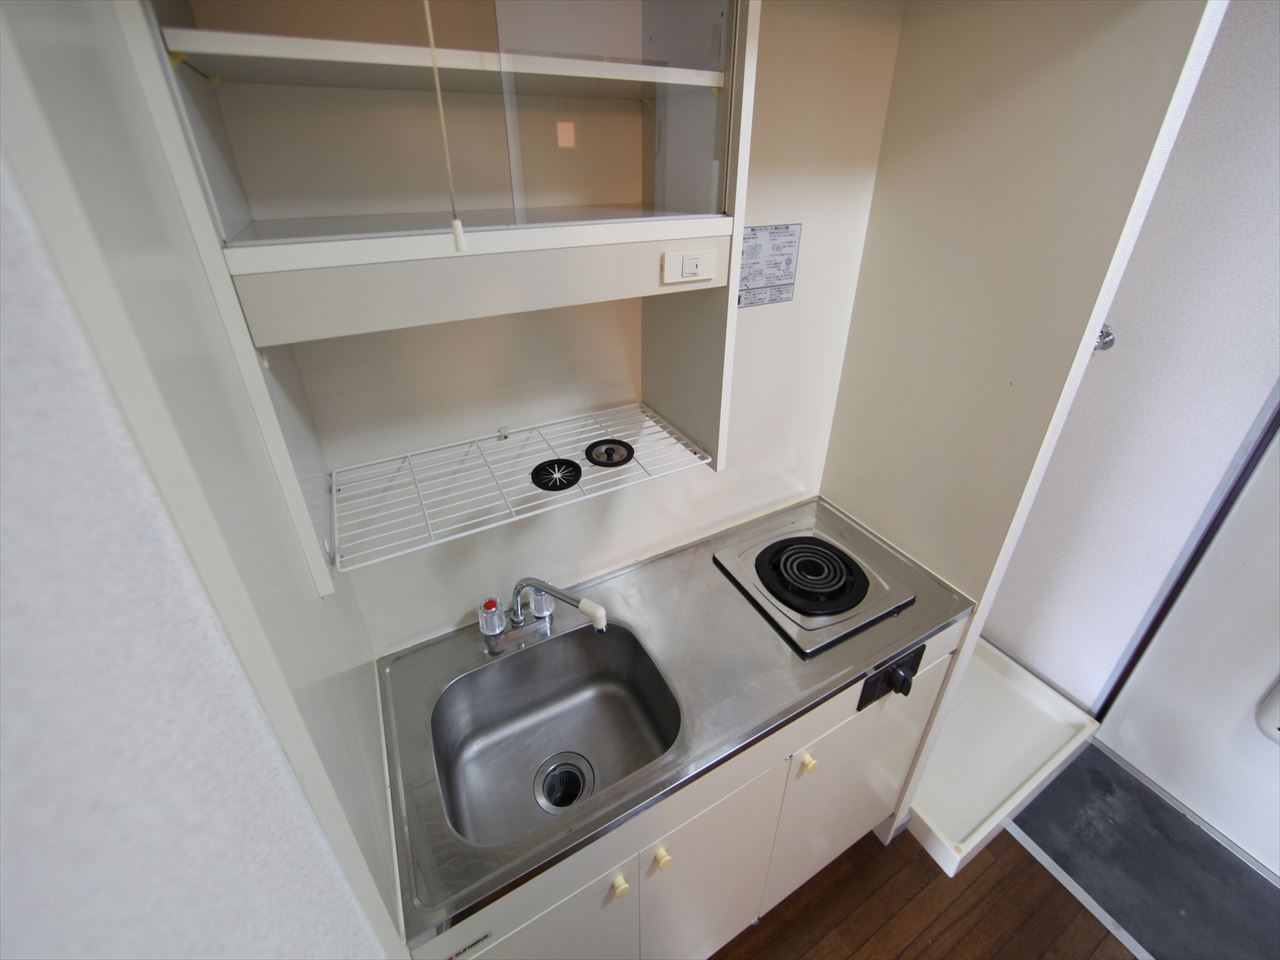 Kitchen. With electric stove refrigerator ・ Range, etc. You can offer